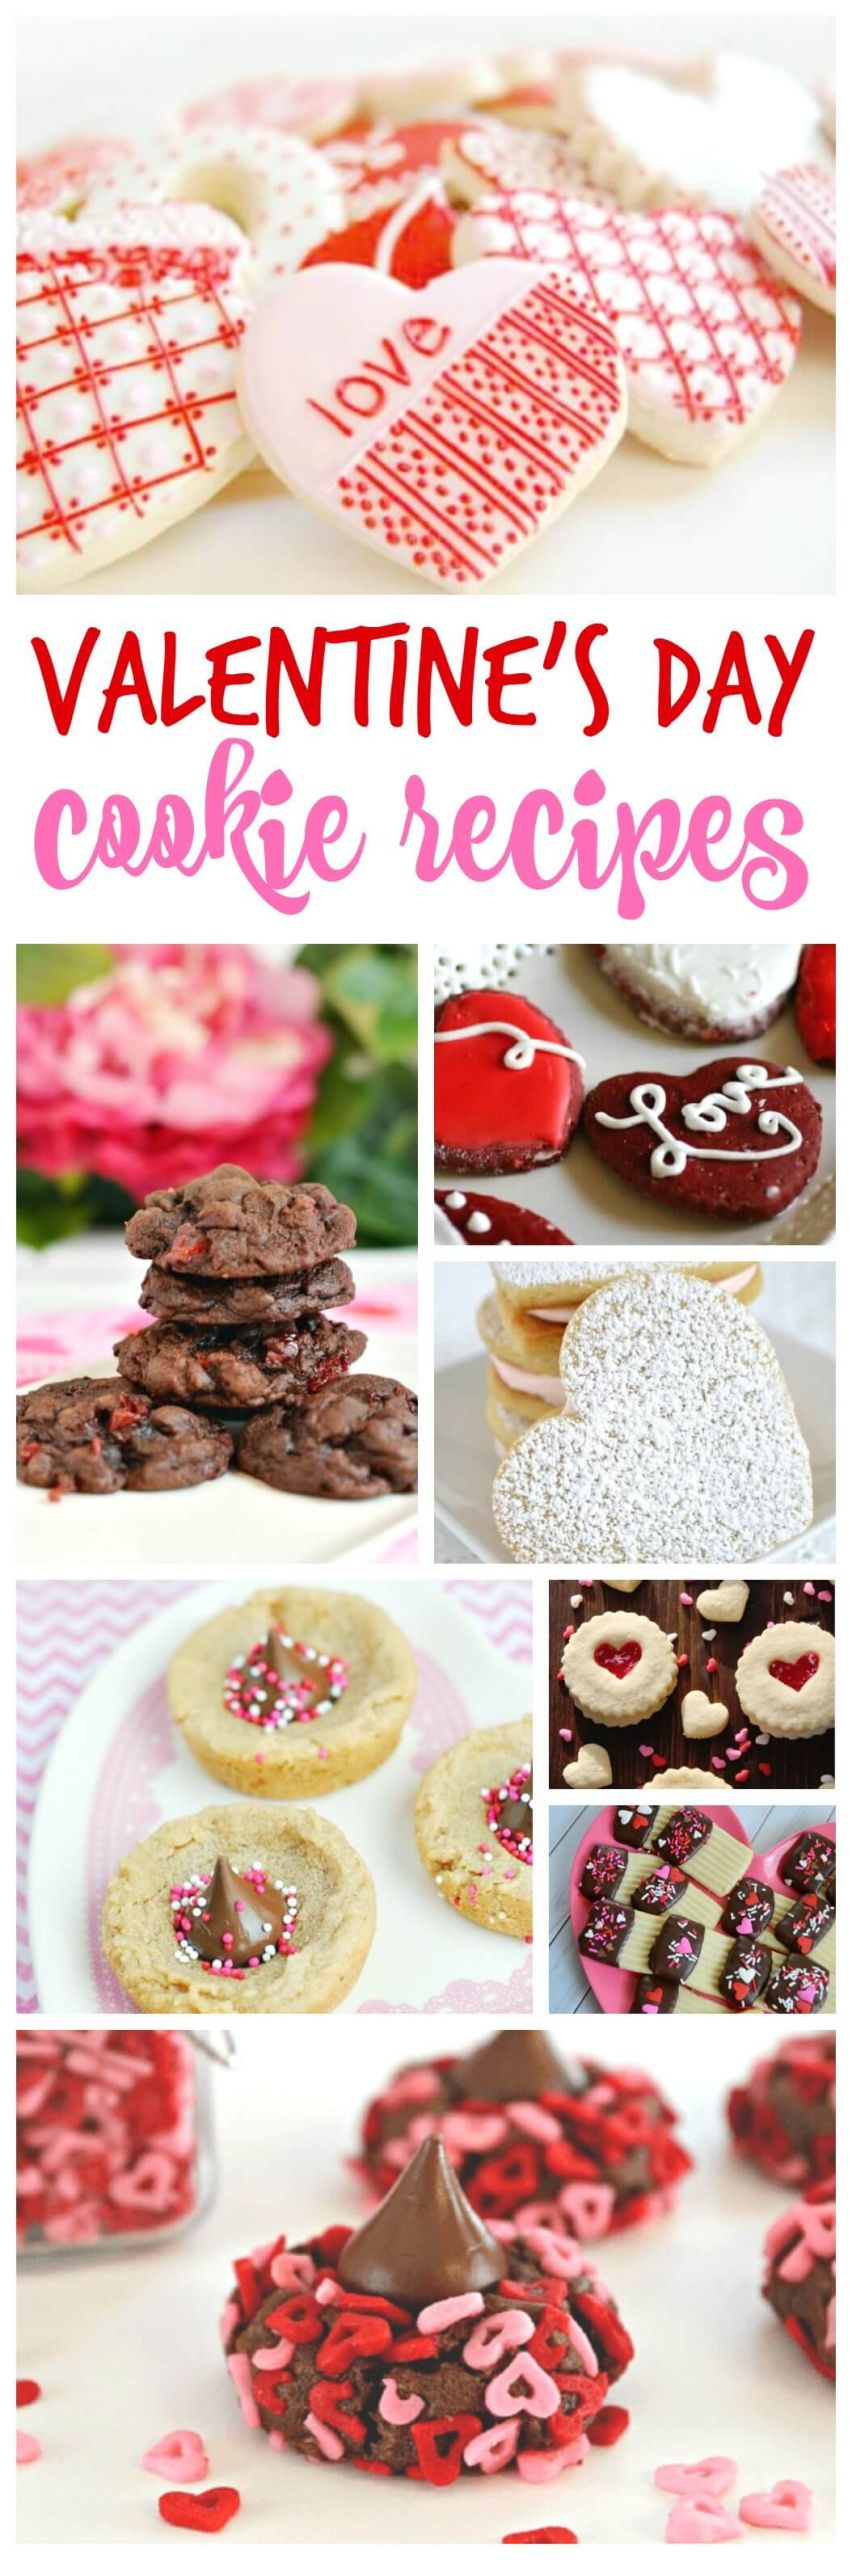 Valentines Day Cookies Recipes
 Valentines Day Cookie Recipes